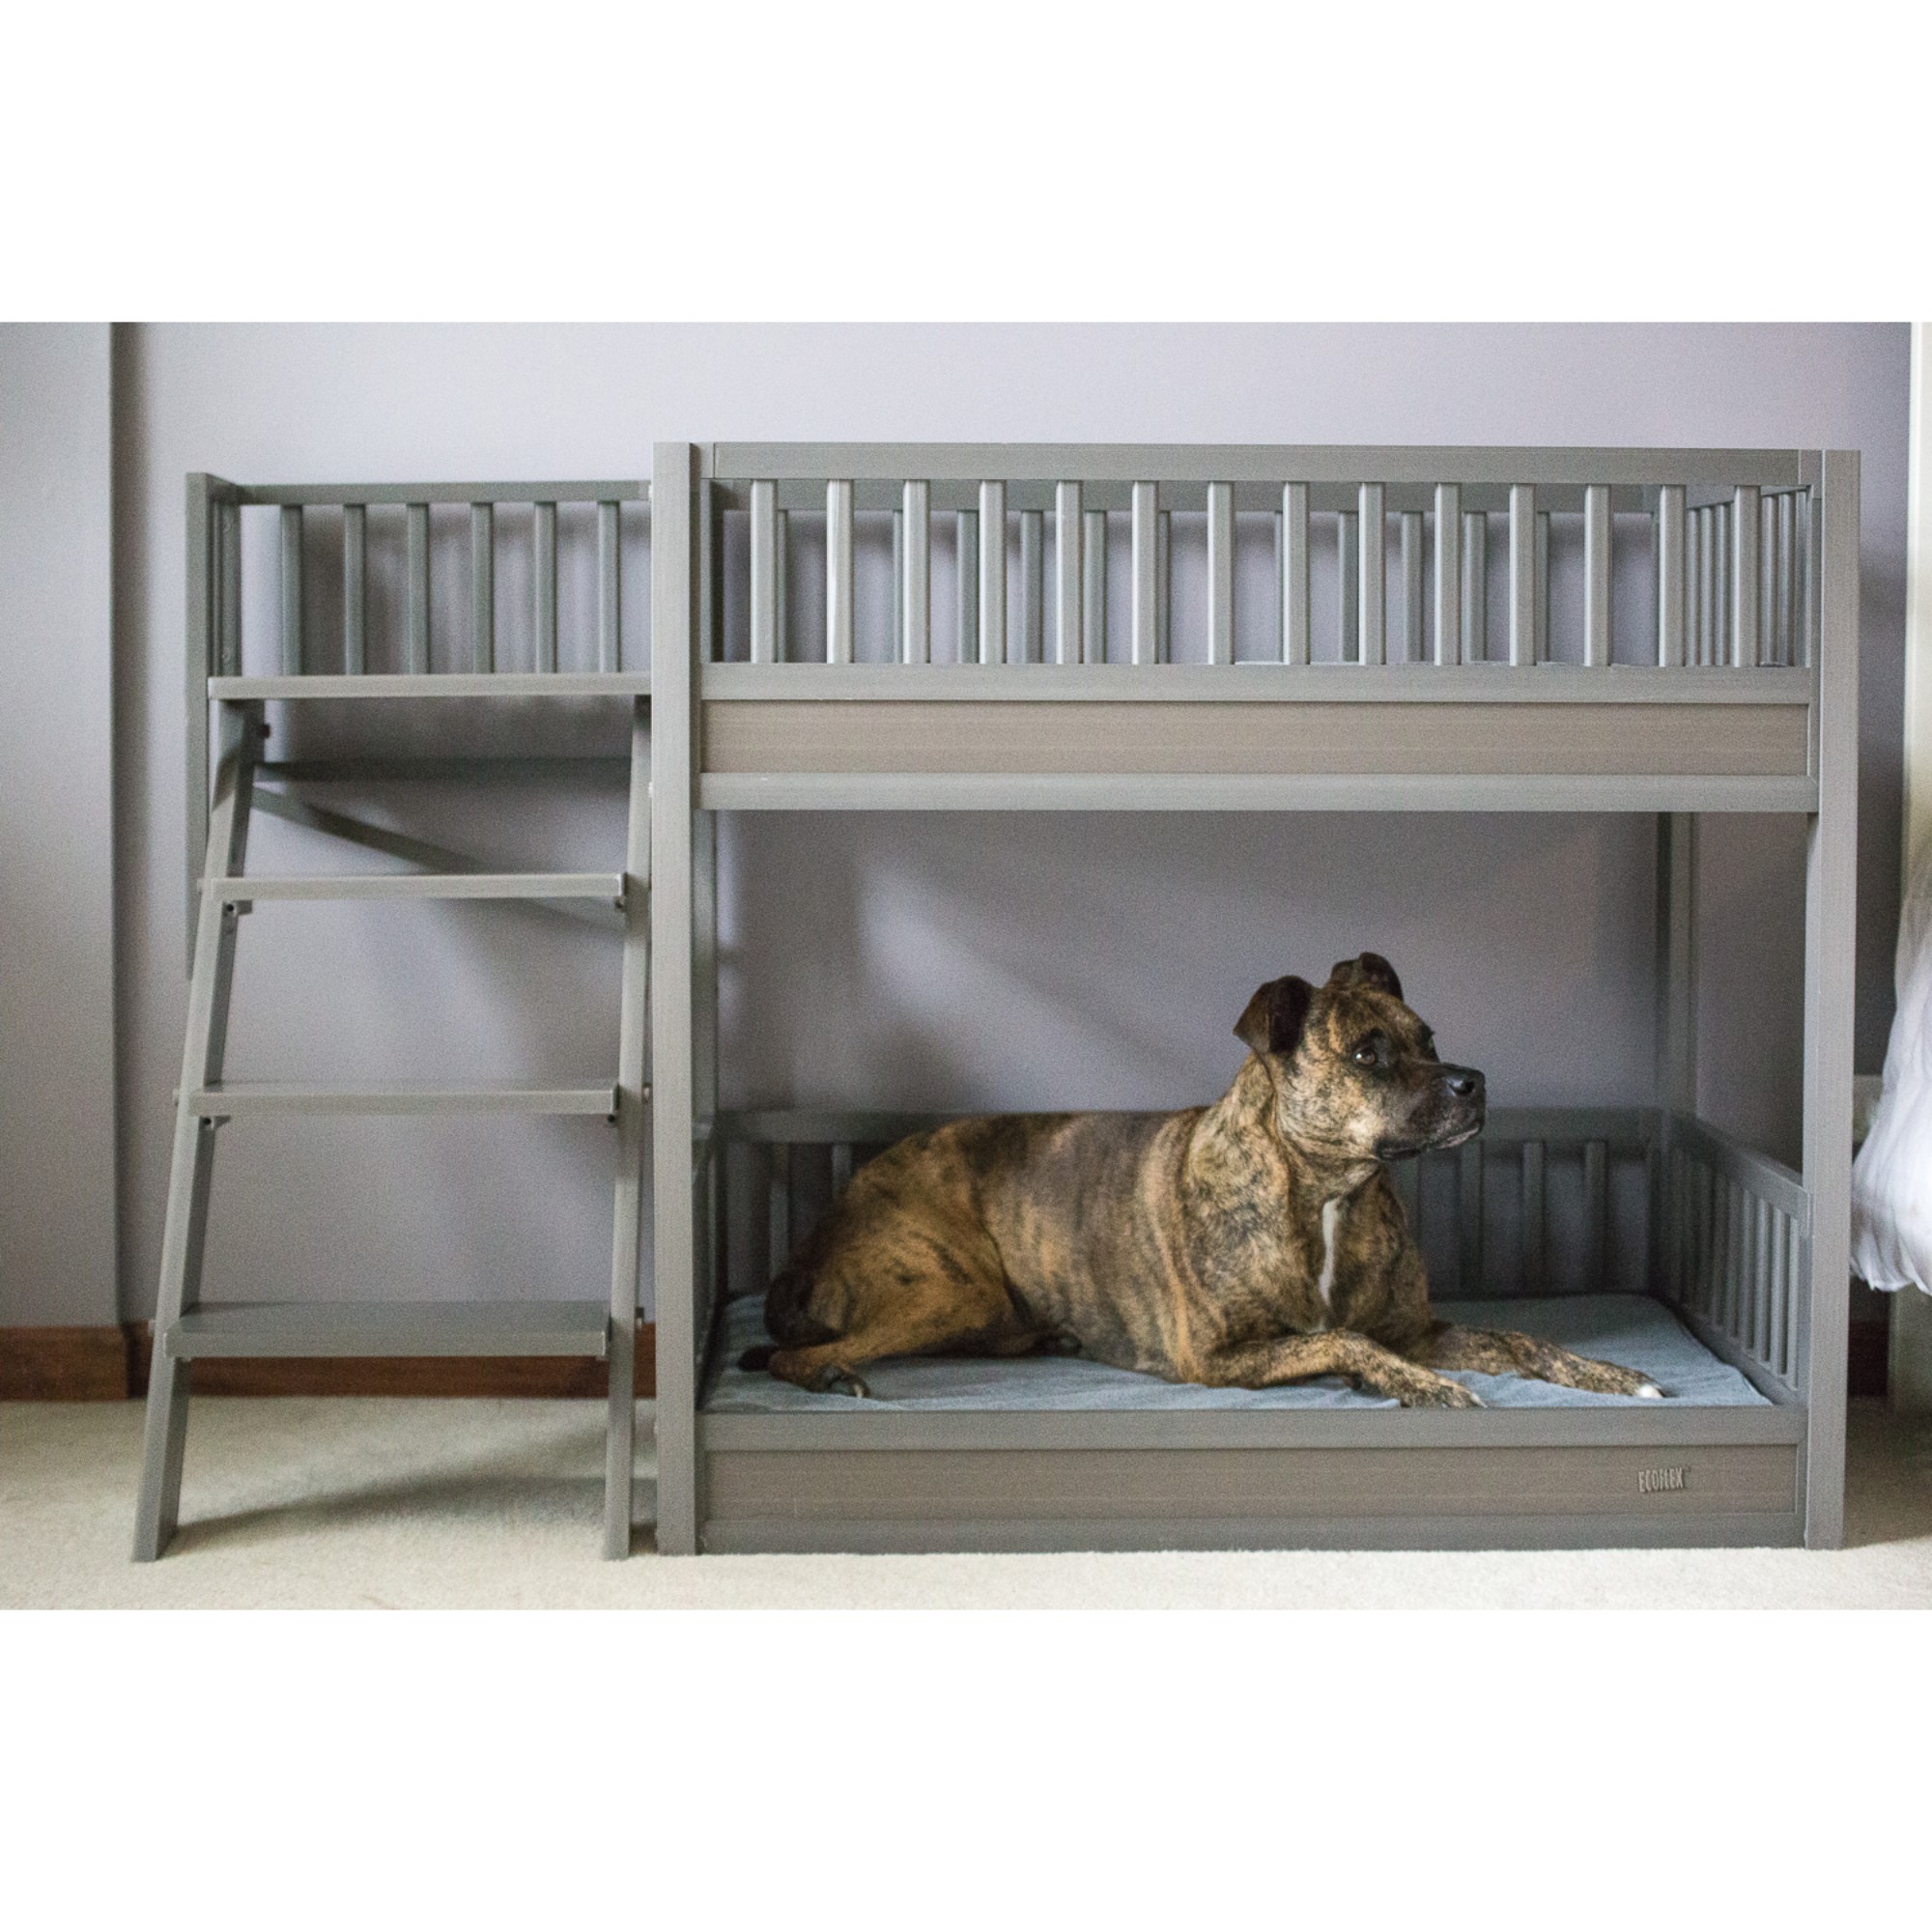 Ecoflex Dog Bunk Bed with Removable Cushions, Gray - image 1 of 10